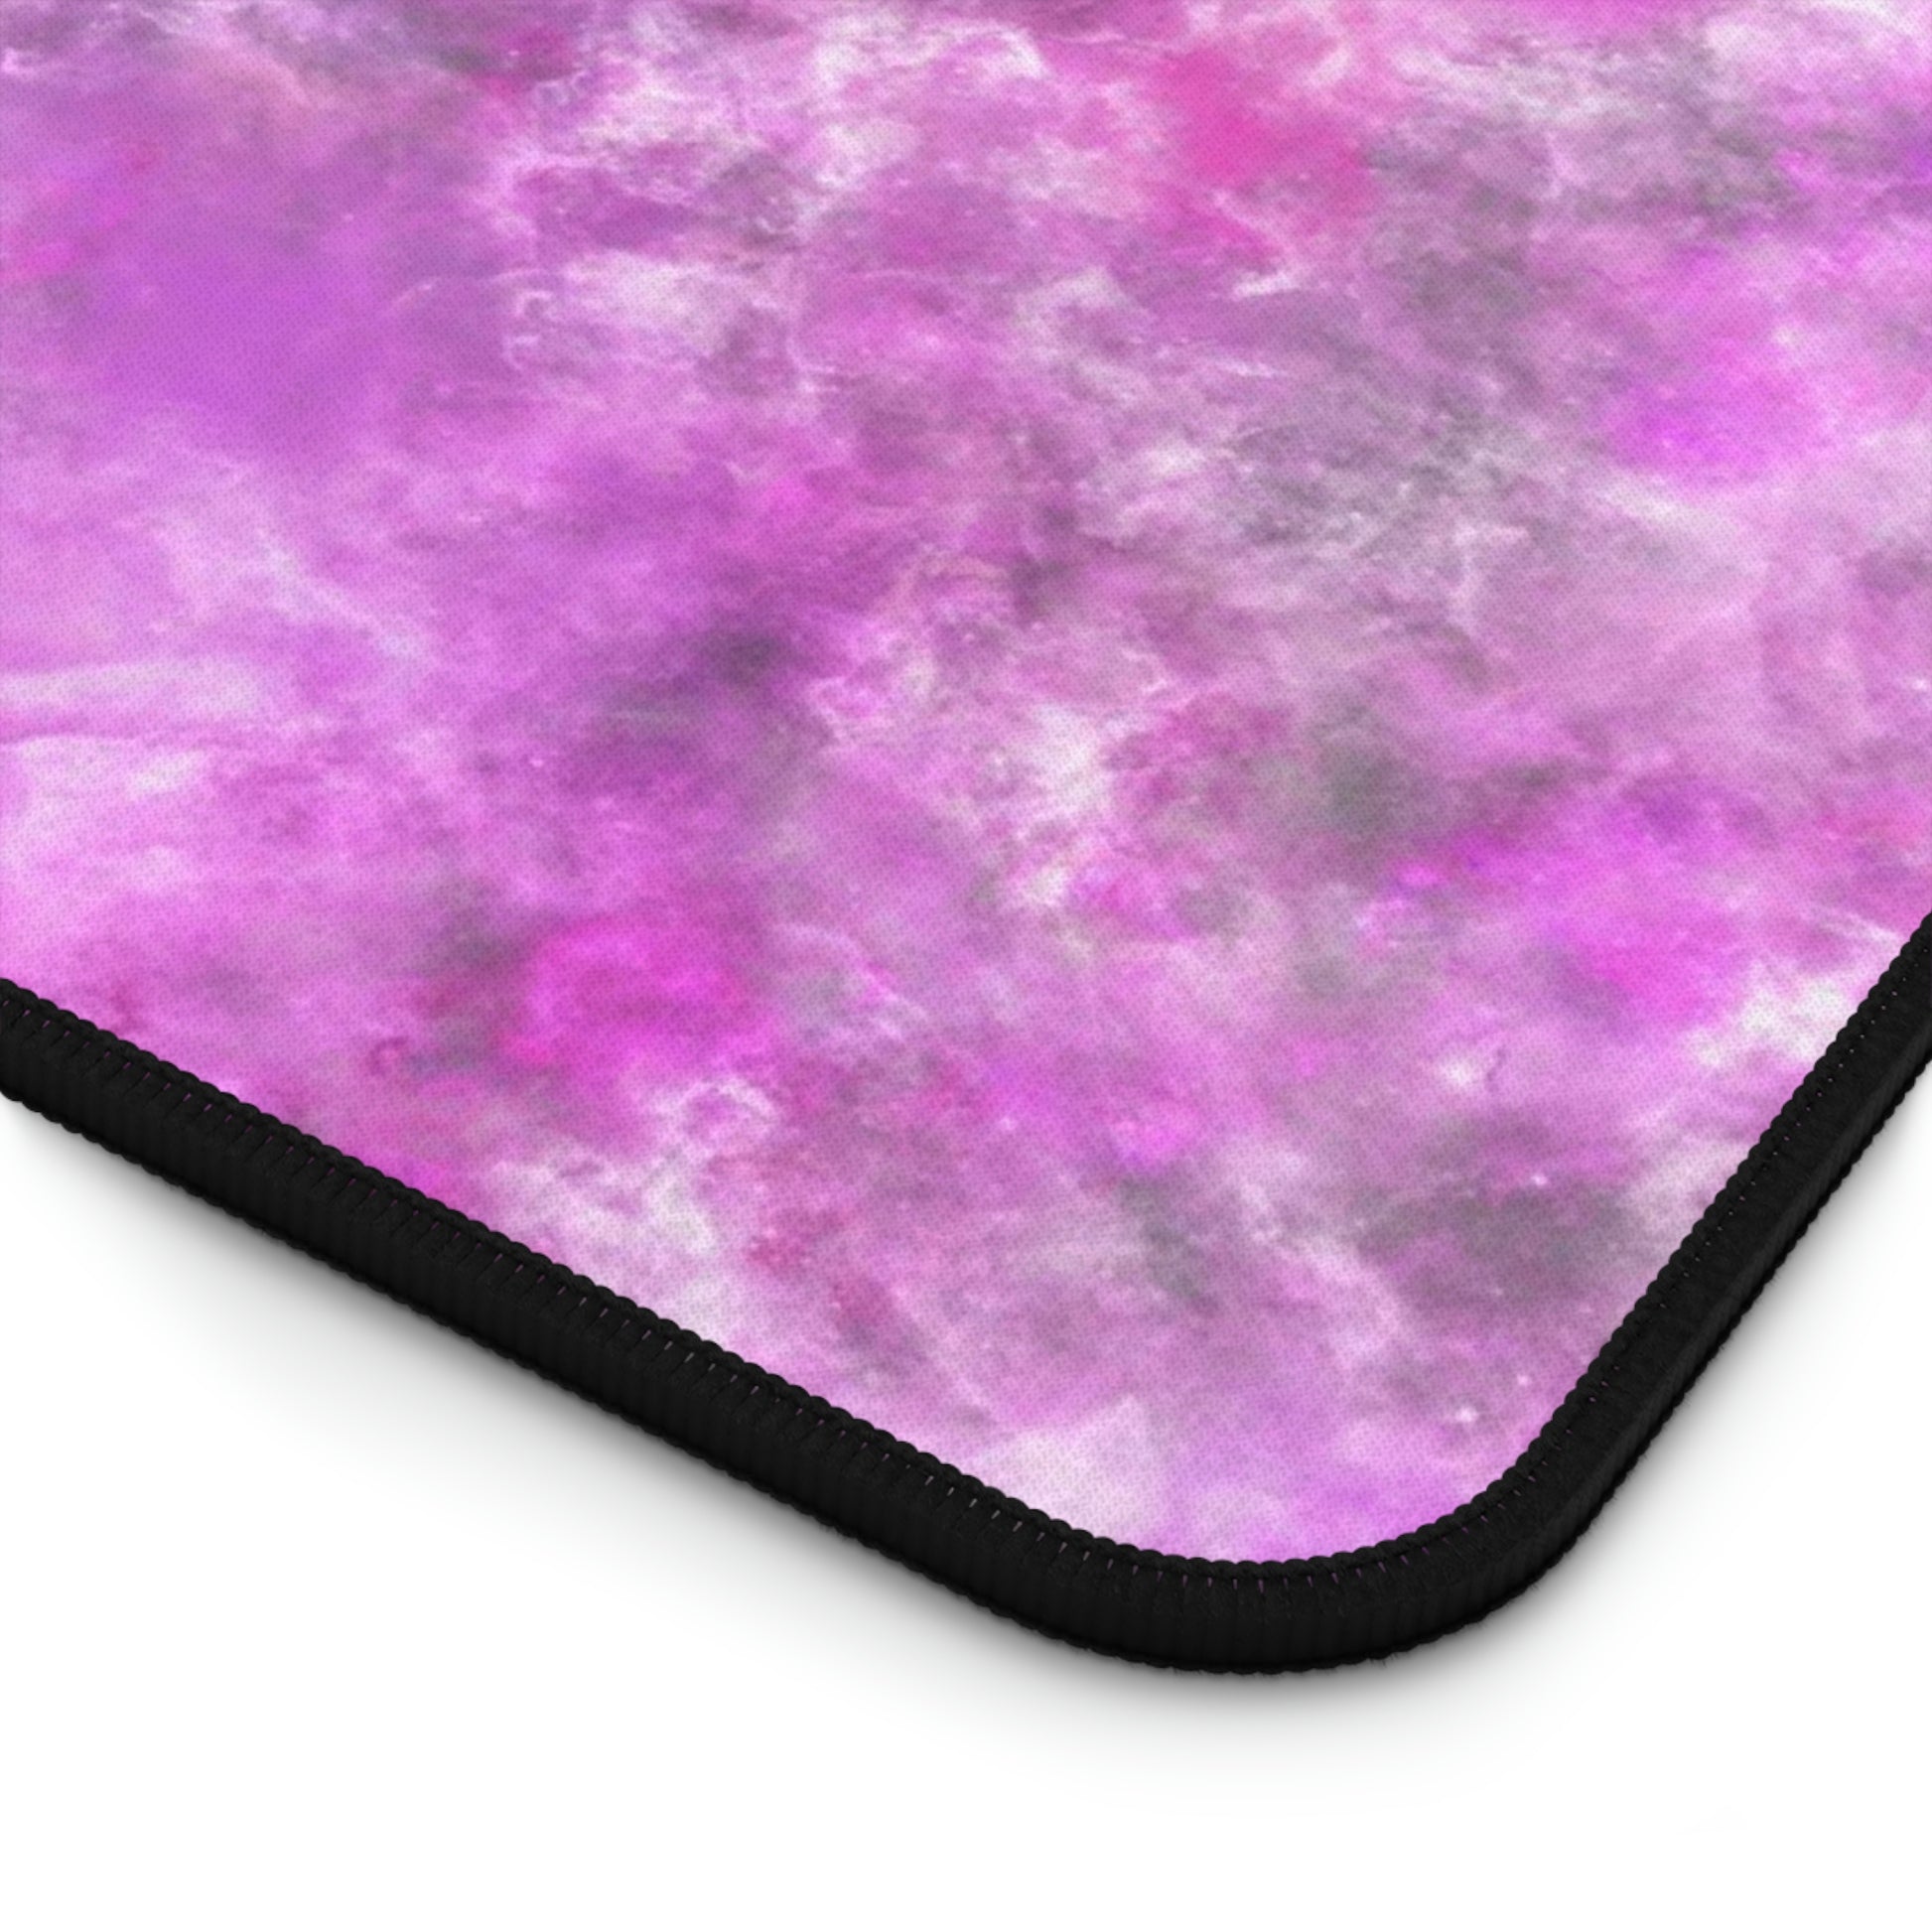 The corner of a 12" x 22" desk mat with a fluffy mix of pink, white, and gray.